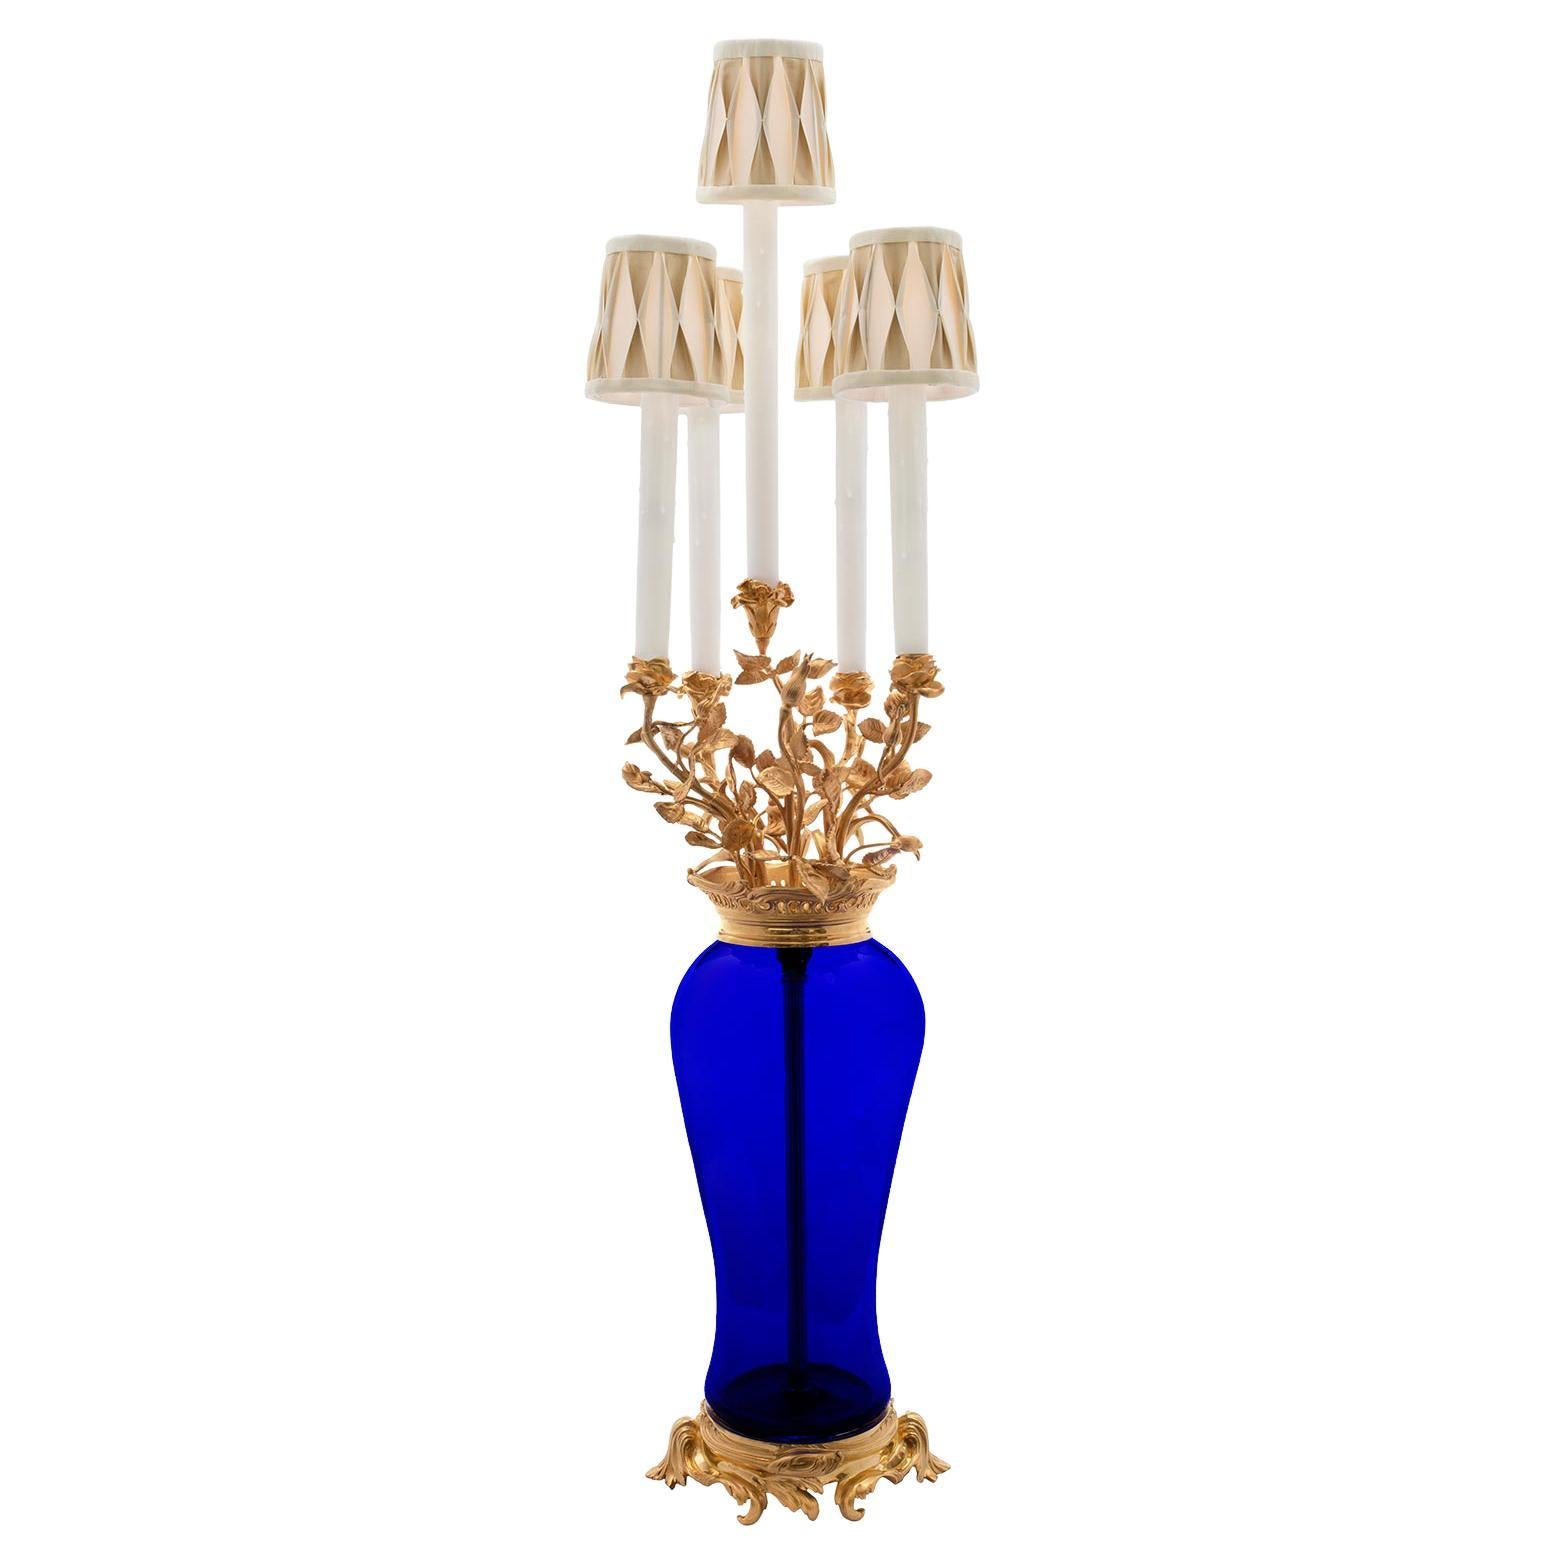 French 19th Century Louis XVI St. Blue Glass and Ormolu Candelabra Lamp For Sale